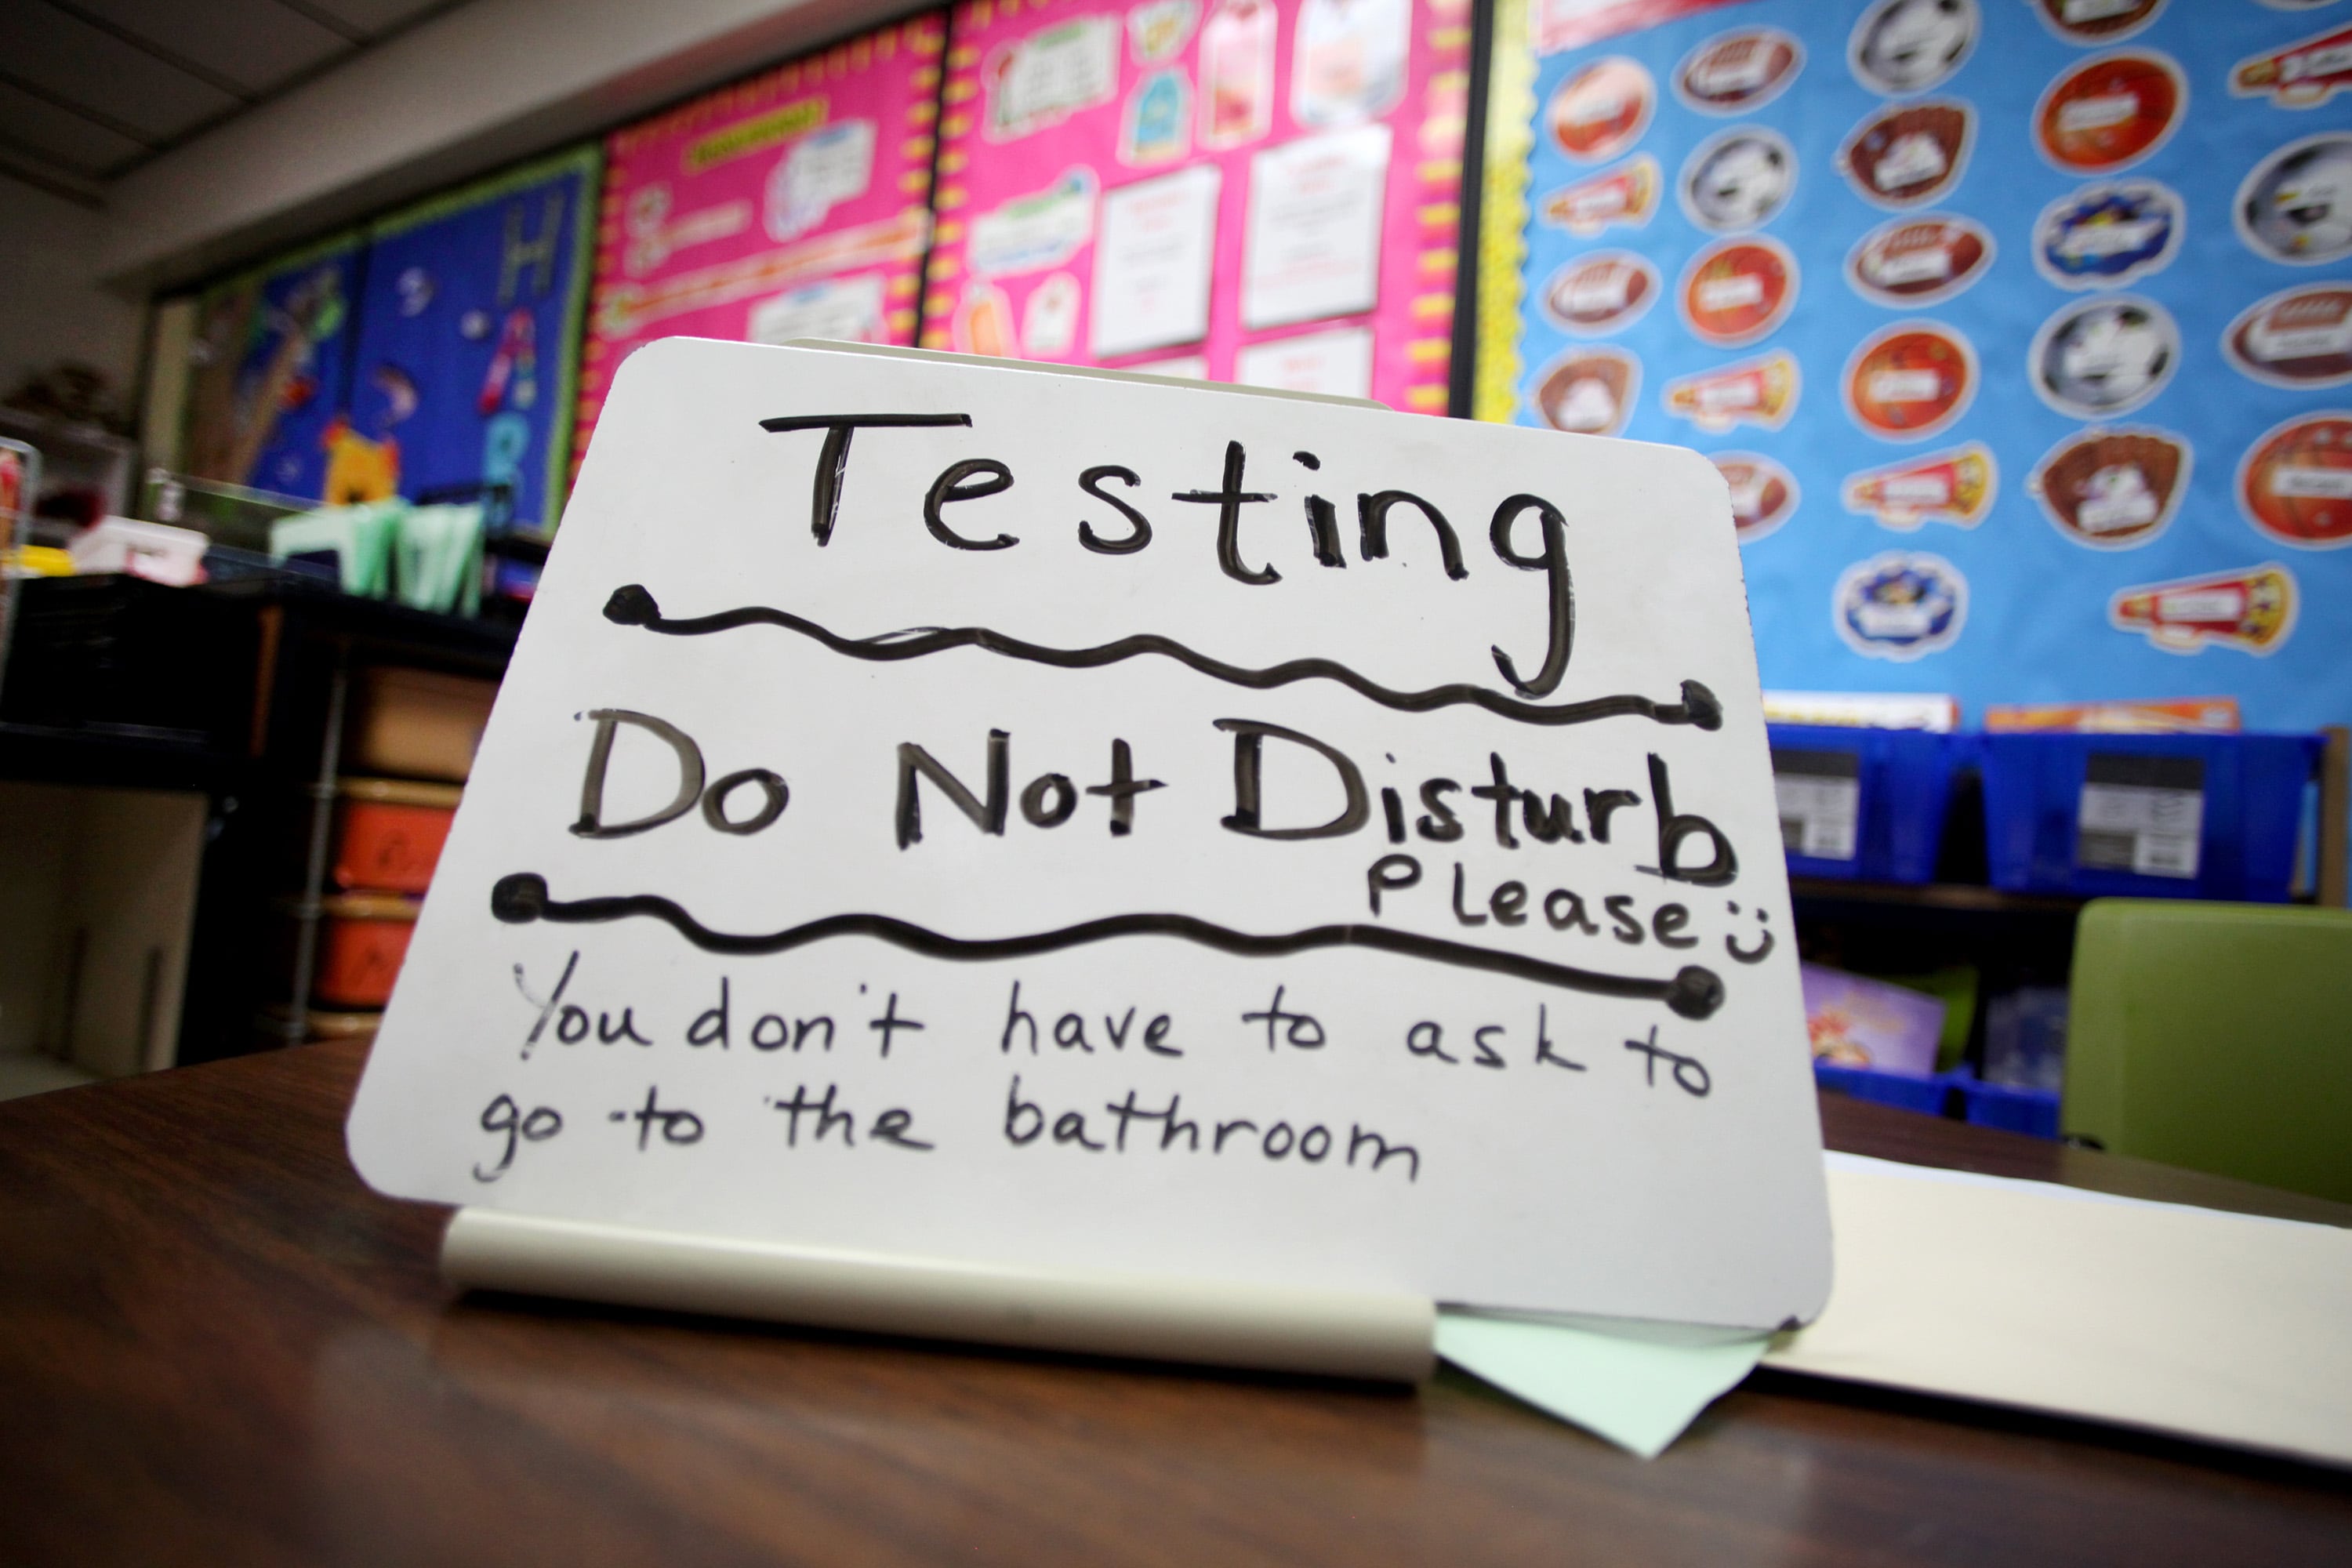 Now that PARCC tests are inevitable, helping kids see the big picture